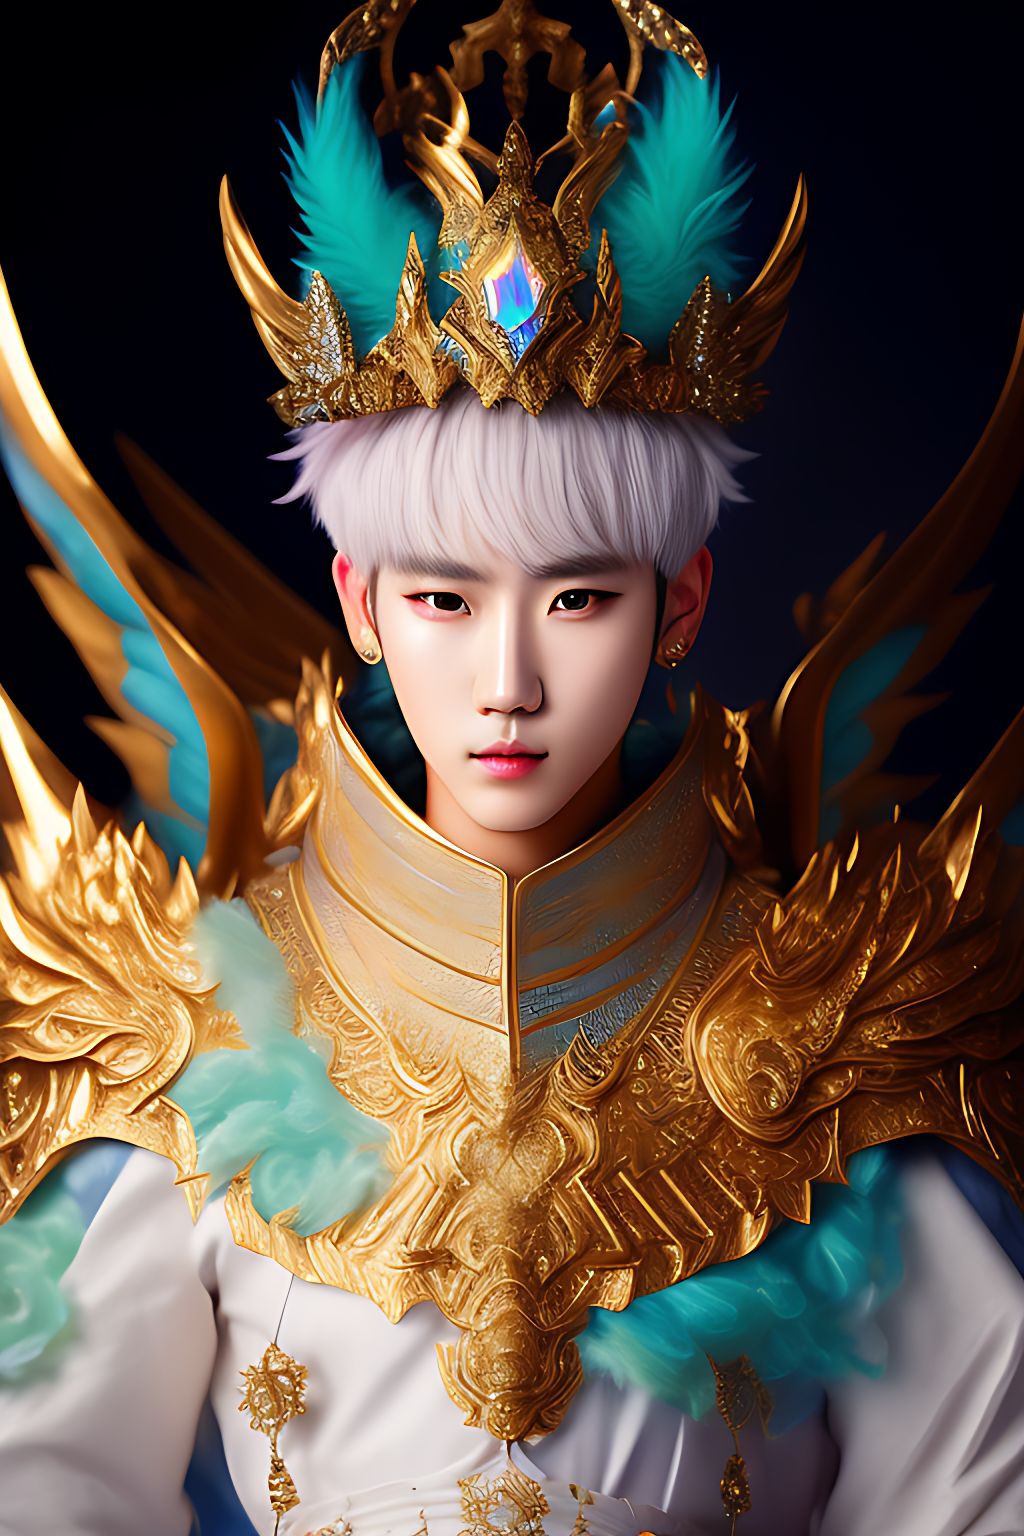 An iridescent kpop Shinee Key kibum as a paladin hero on a white dragon., in his crown surrounded by large white clouds and golden crystals, Highly detailed, Digital painting